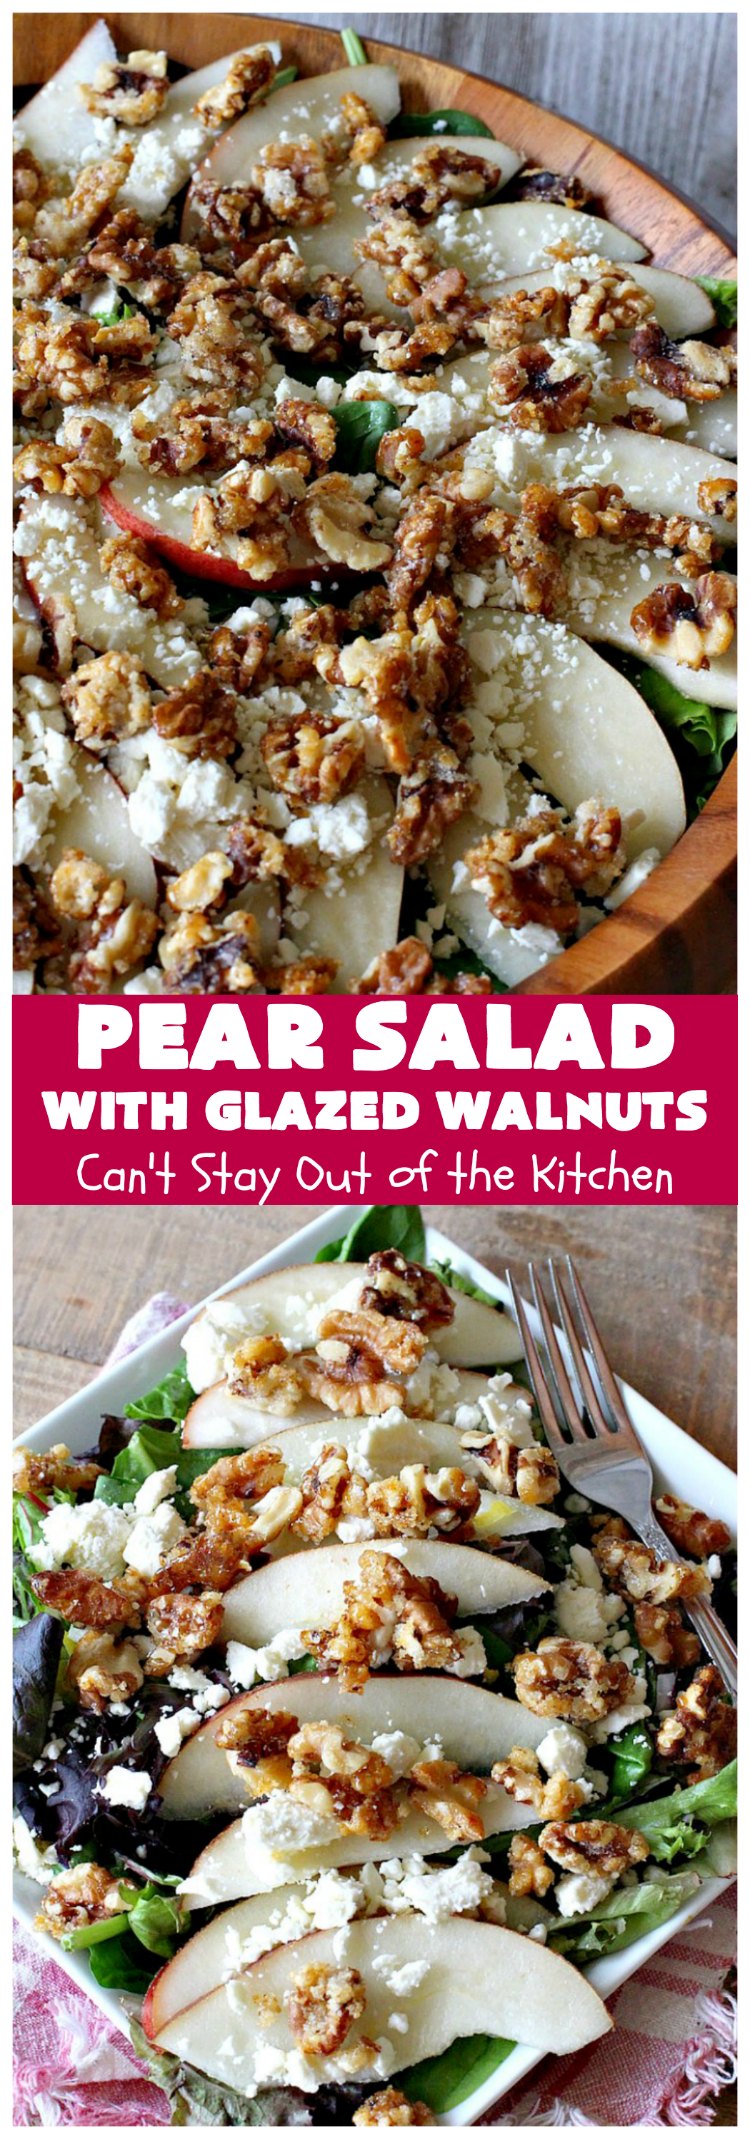 Pear Salad with Glazed Walnuts | Can't Stay Out of the Kitchen